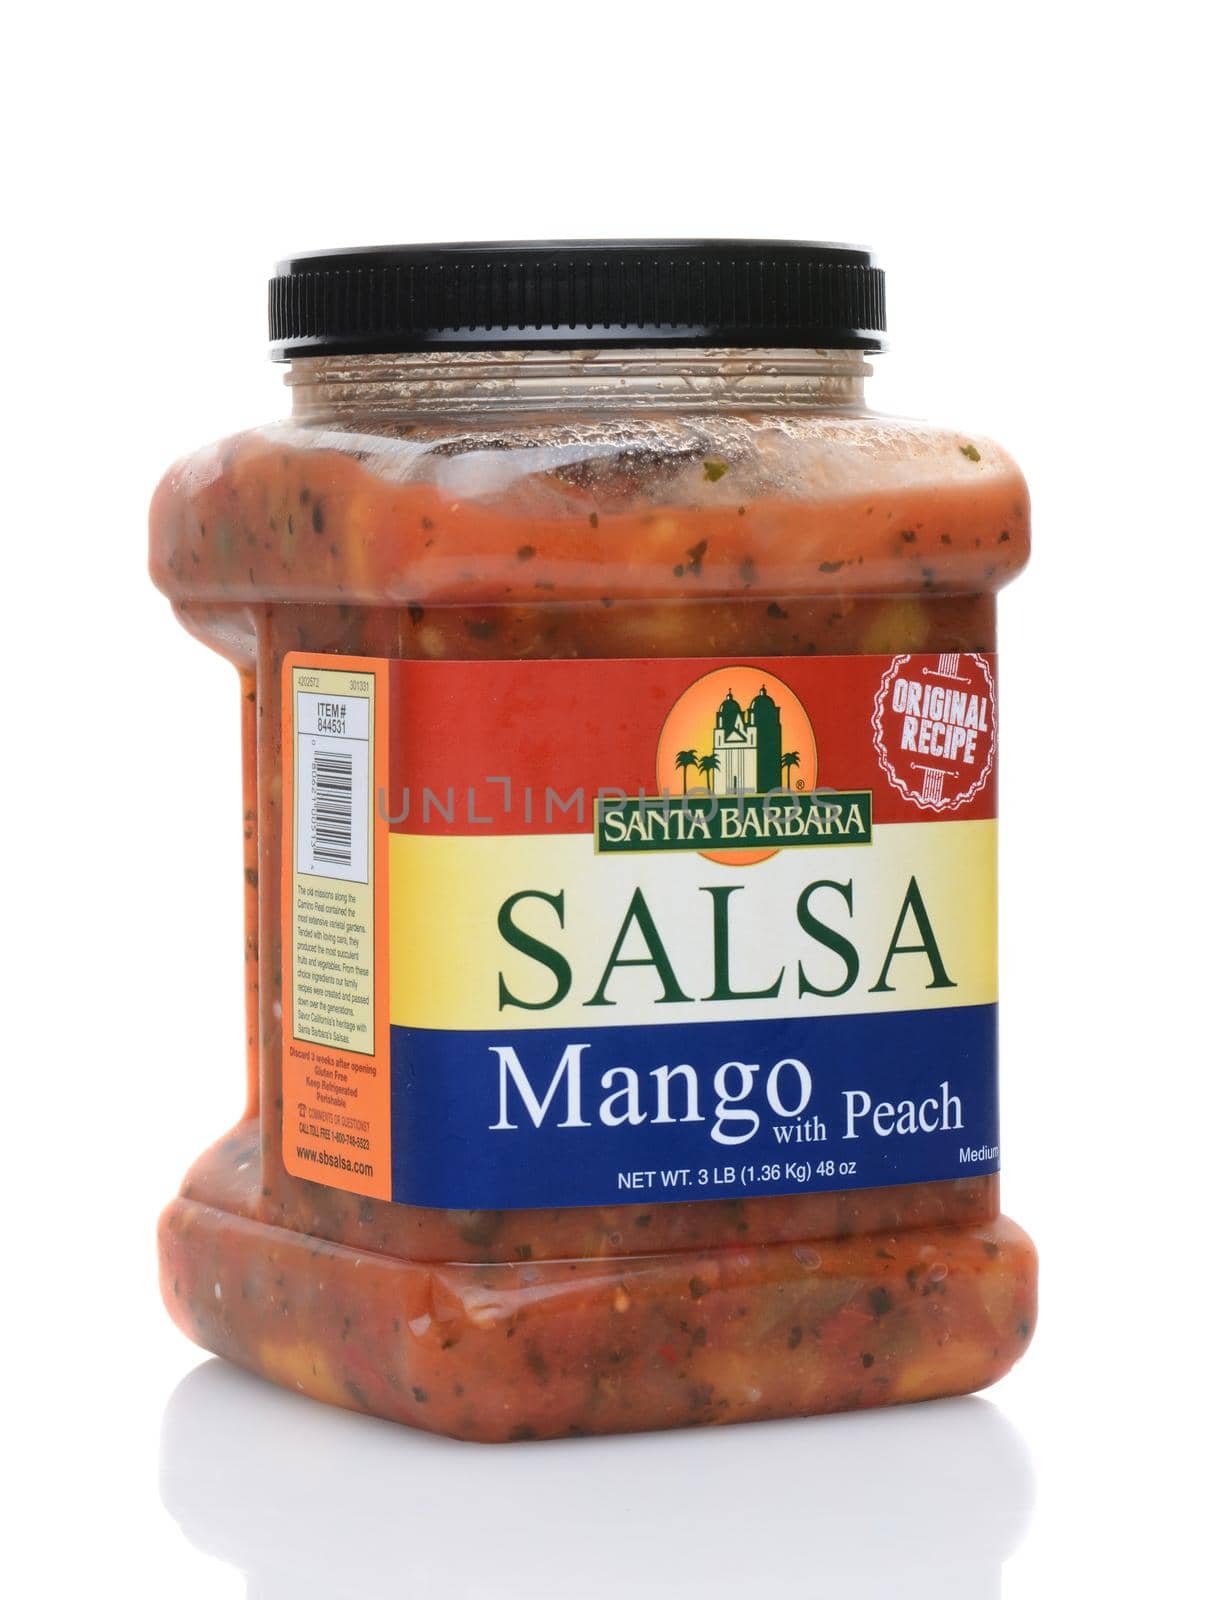 IRVINE, CA - JUNE 23, 2014: A Jar of Santa Barbara Mango with Peach Salsa. Founded in 1984 in California, Santa Barbara Salsa is one of America's leading brands of refrigerated salsas.